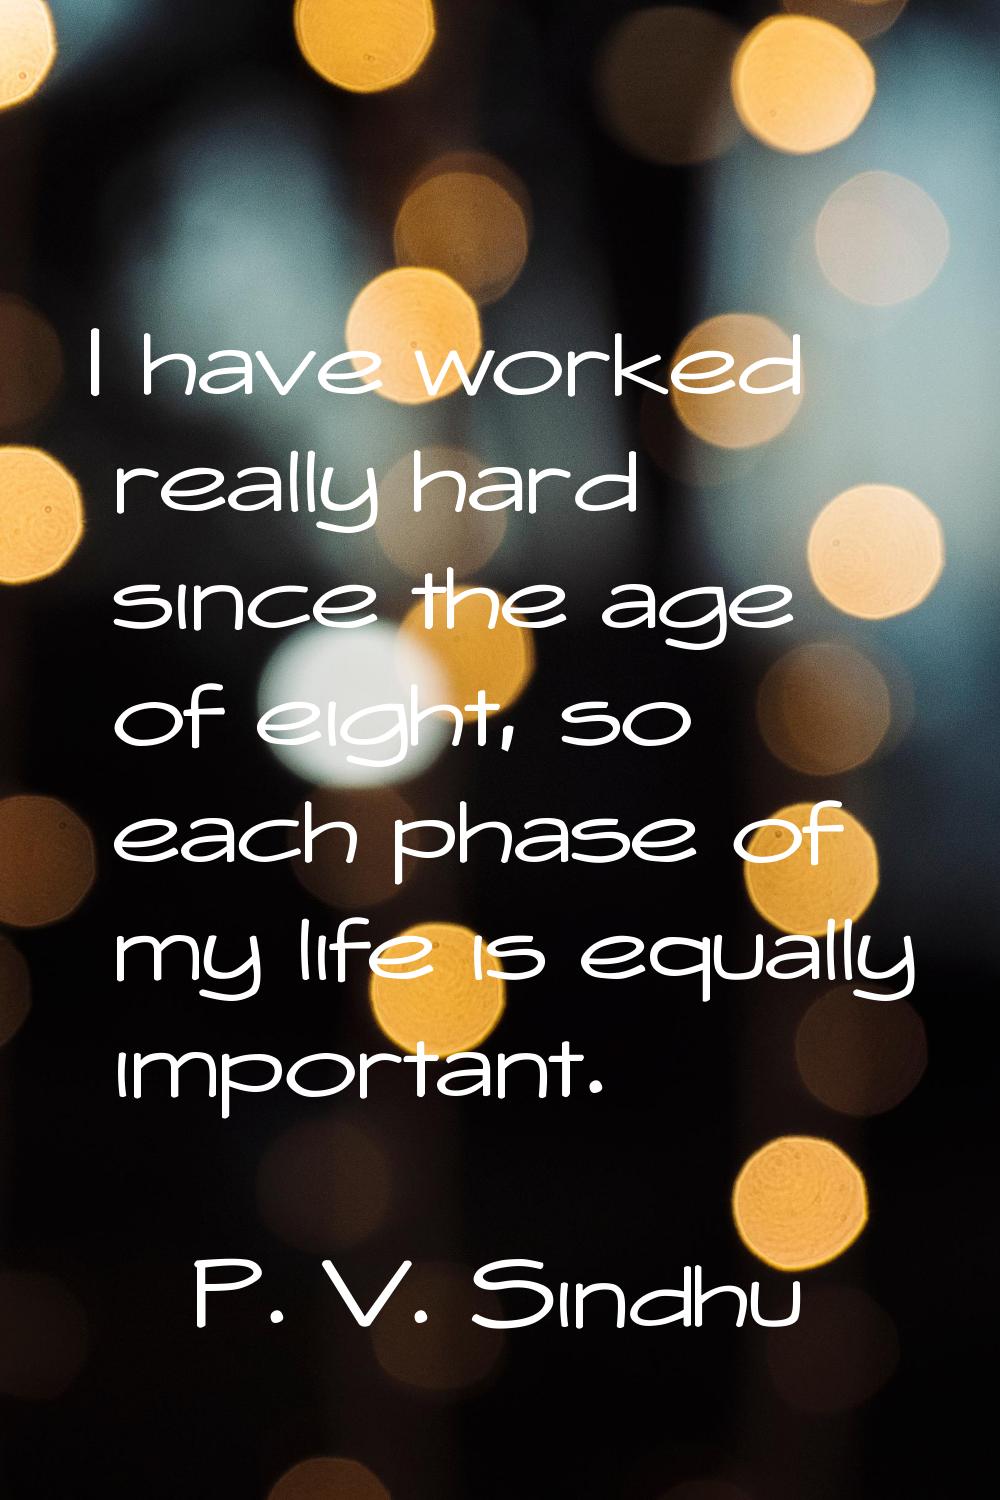 I have worked really hard since the age of eight, so each phase of my life is equally important.